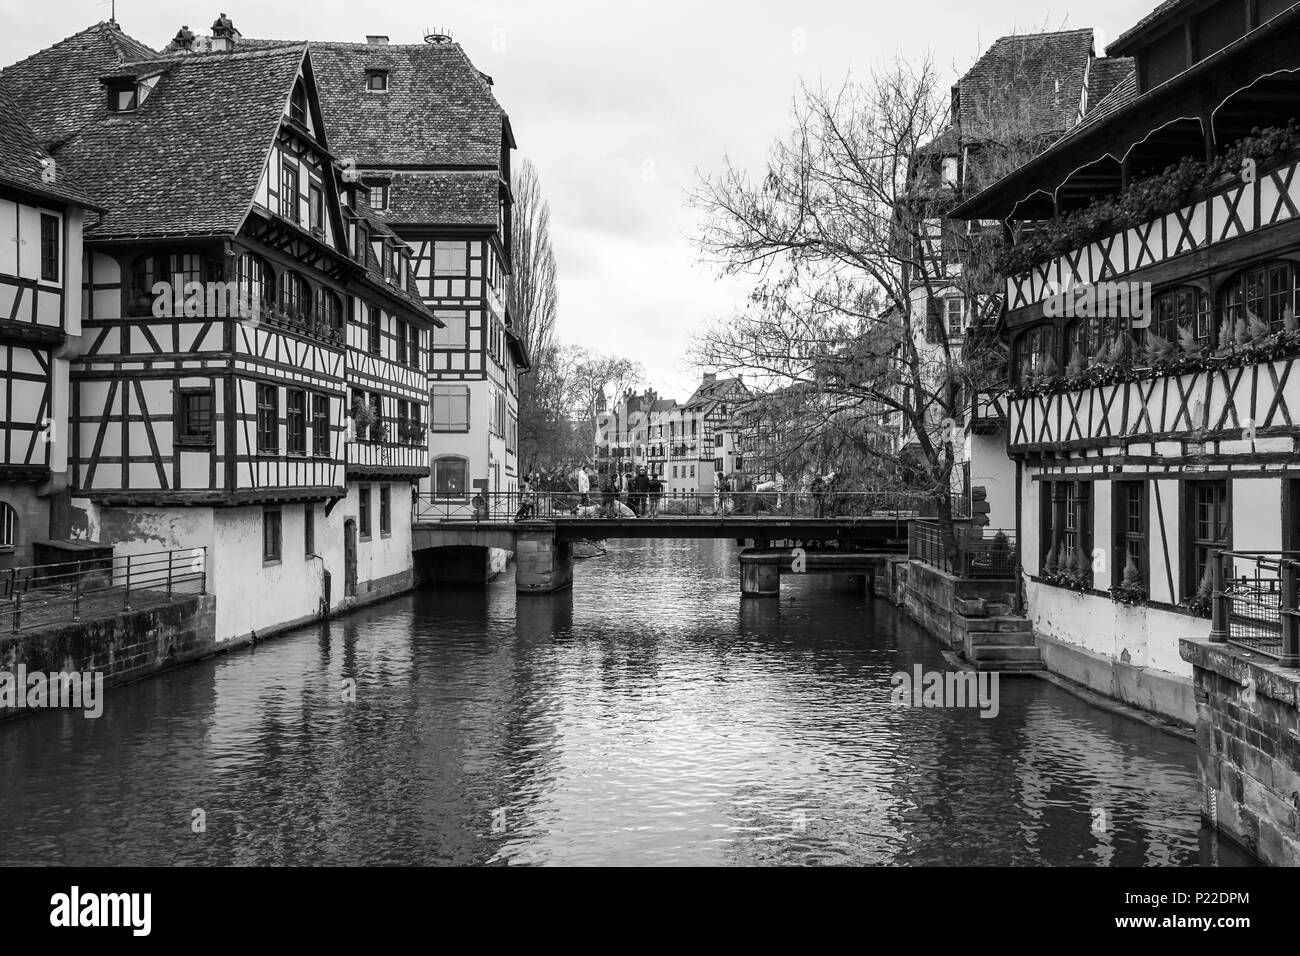 Strasbourg france old town Black and White Stock Photos & Images - Alamy